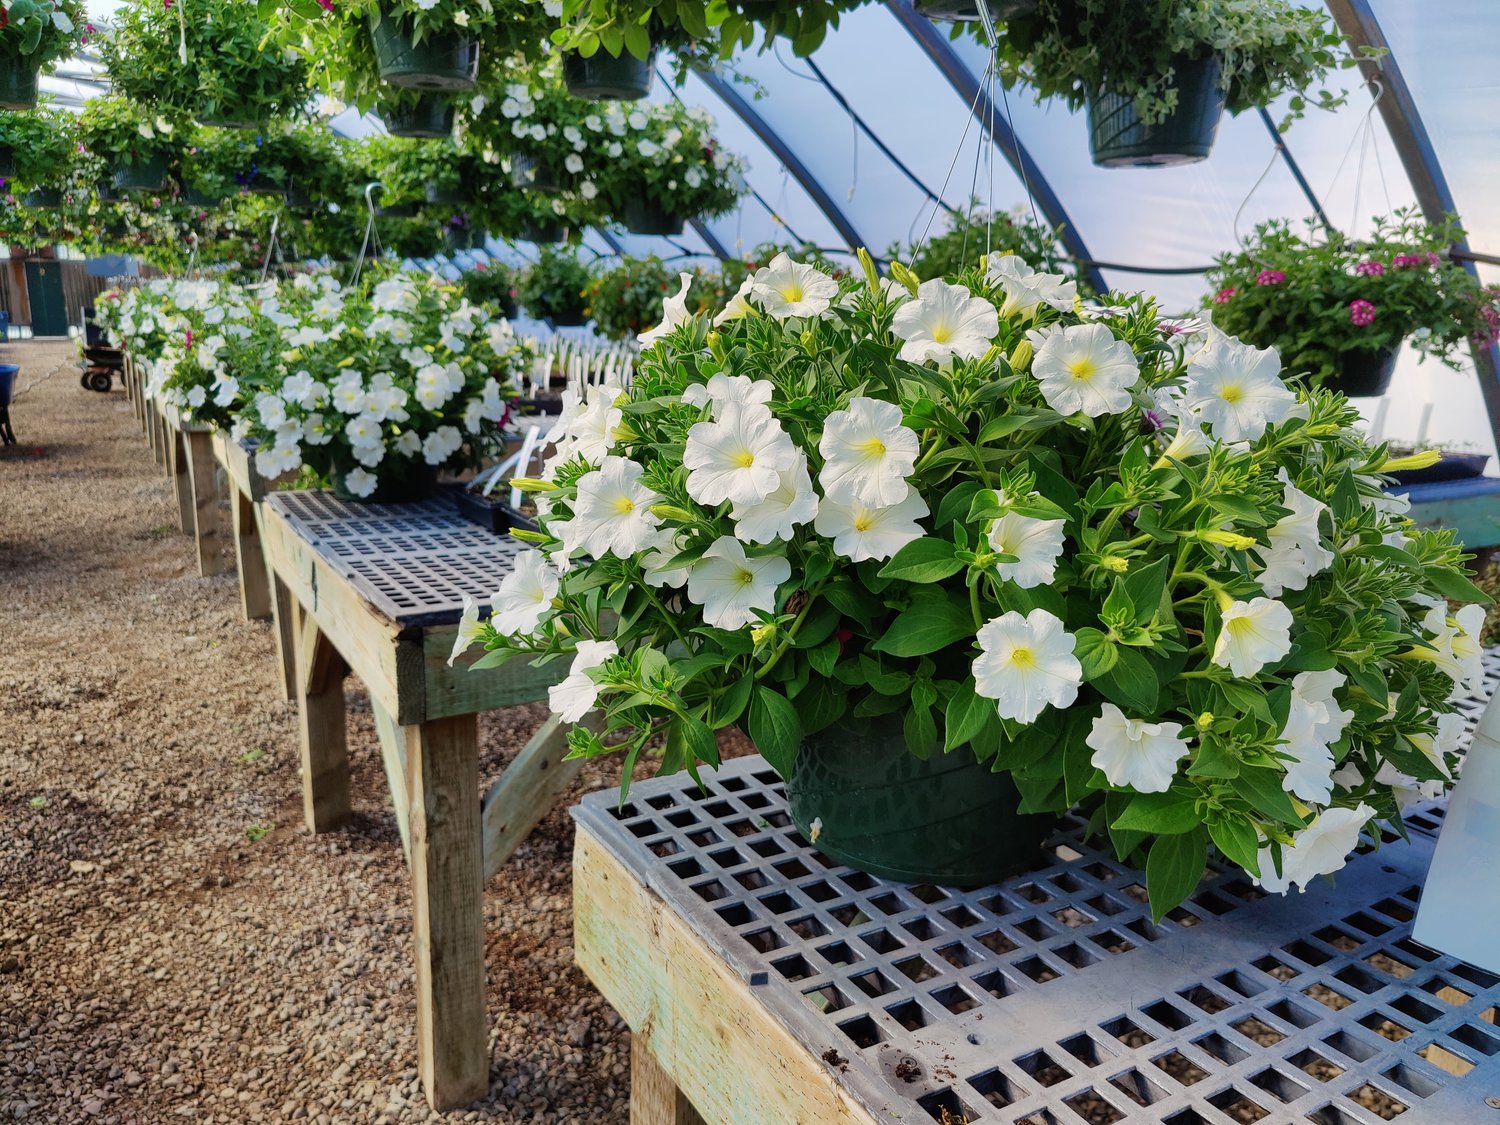 Hanging baskets are ready for sale inside the greenhouses at Battle Ground High School.